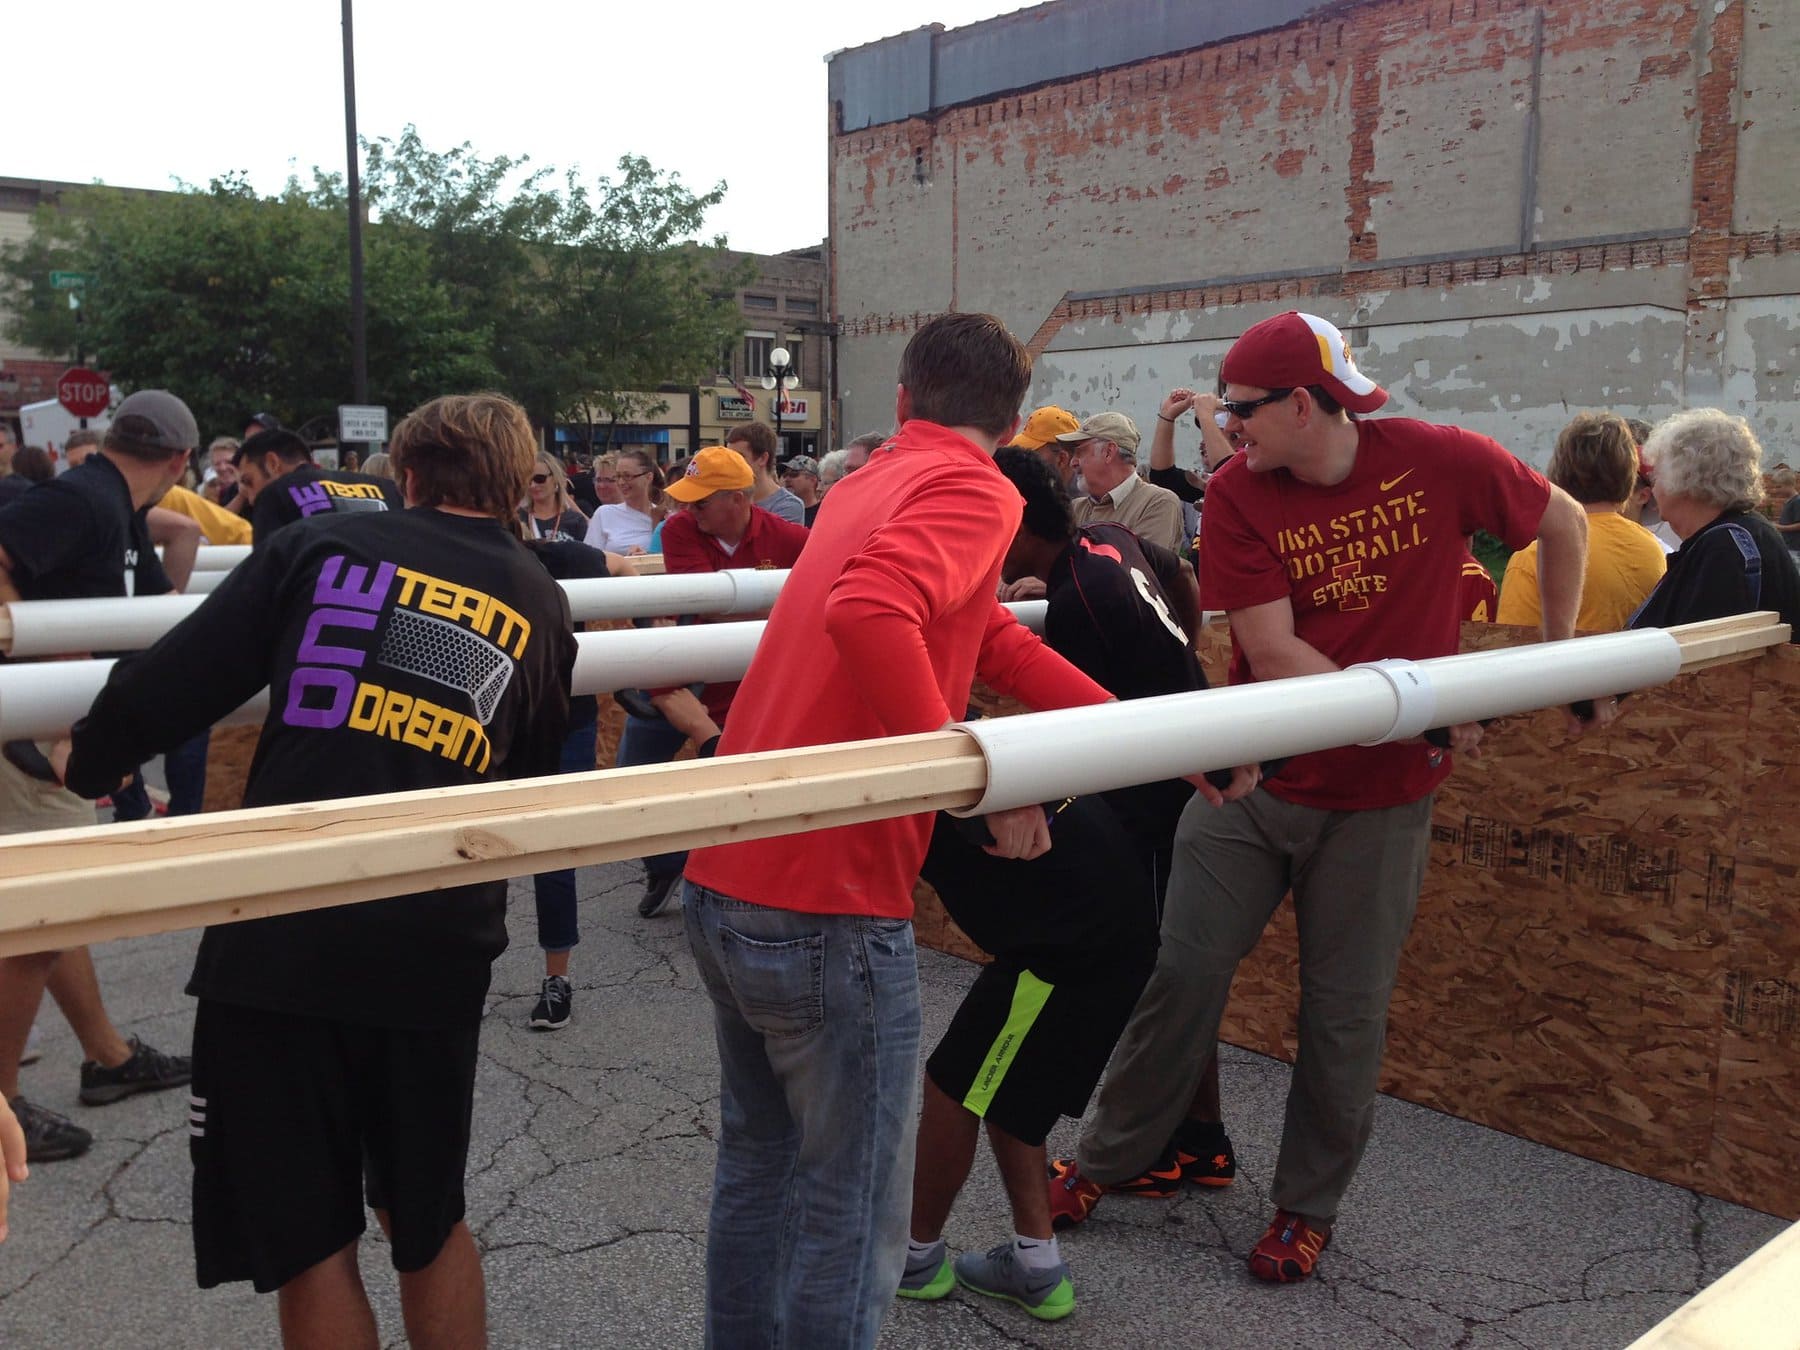 A diverse group of people playing human foosball, read ahead for detailed description